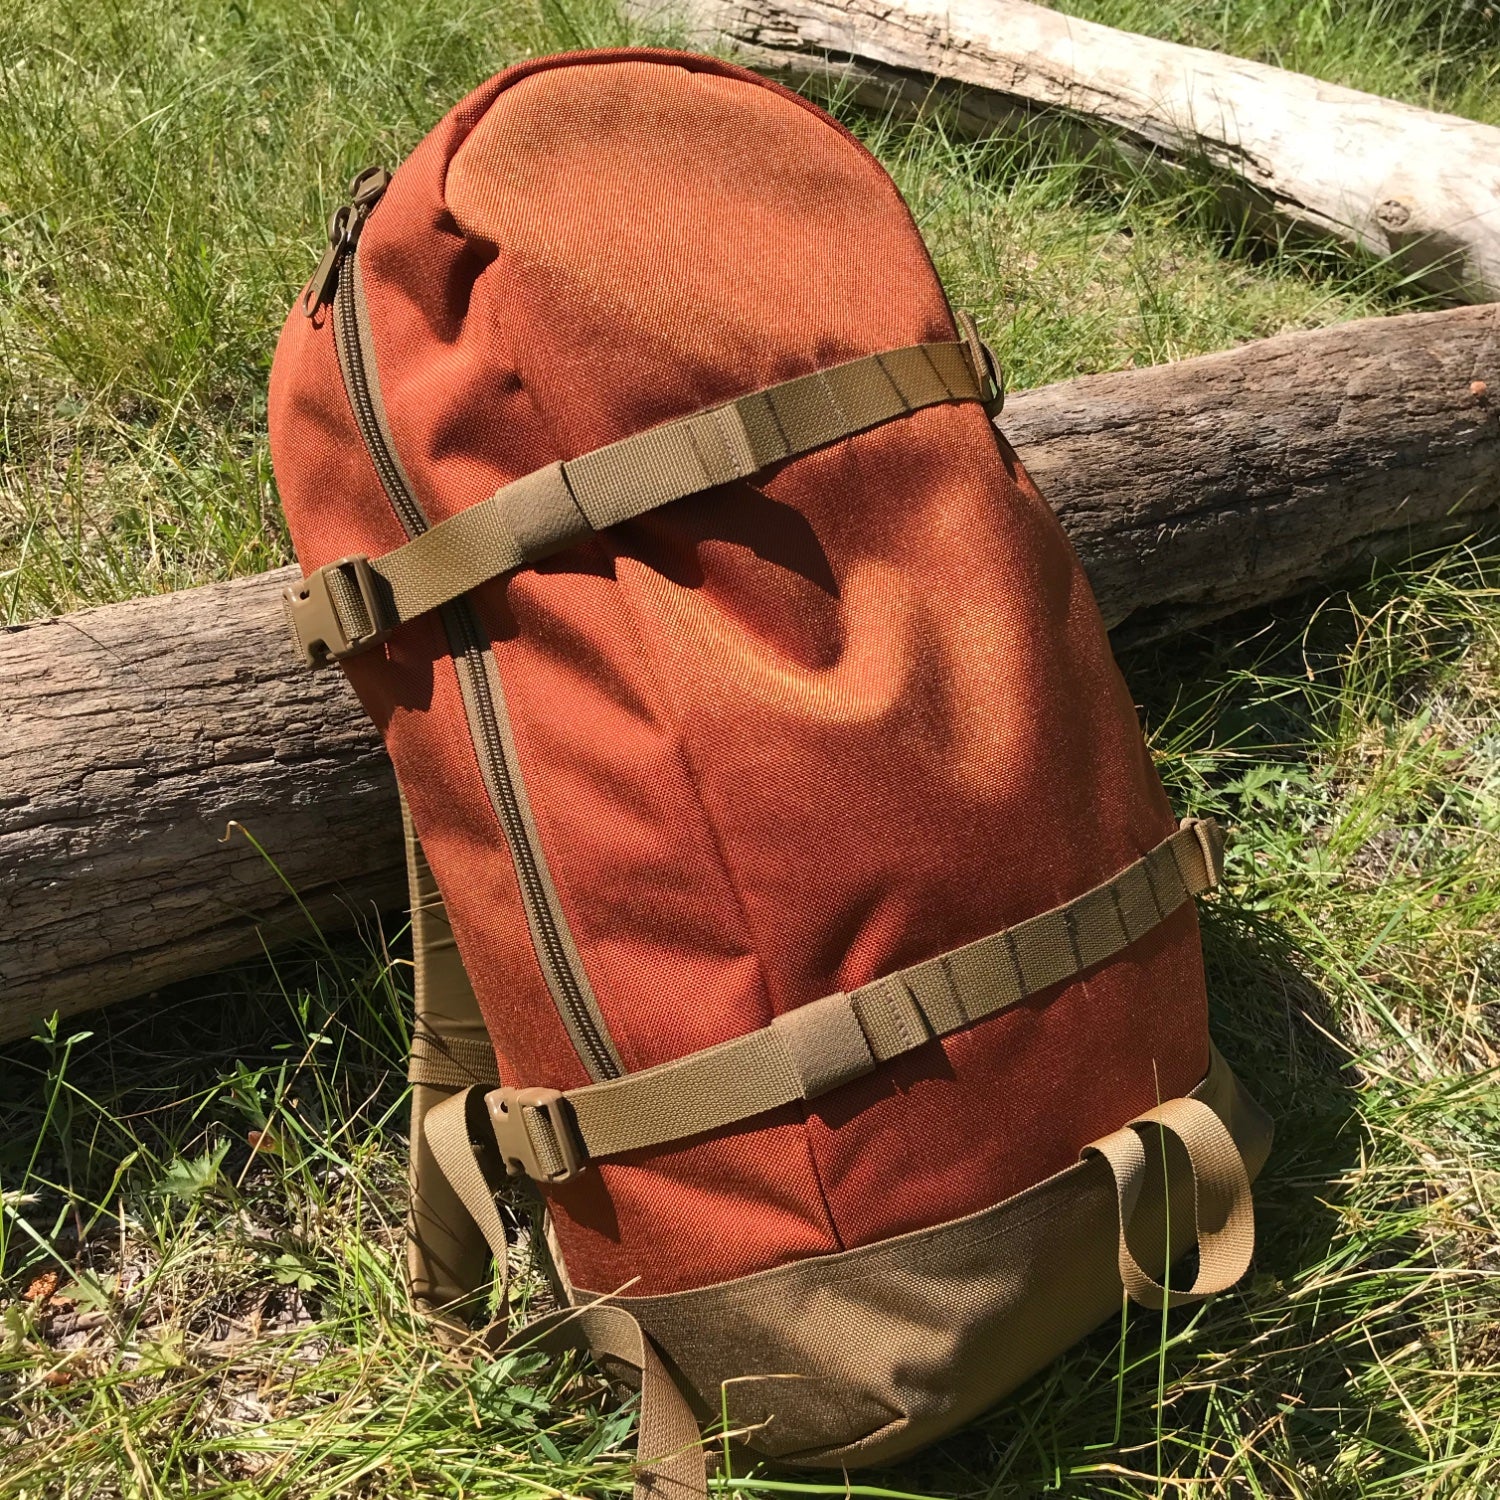 DIY sewing pattern for a backpack to make your own gear (MYOG)